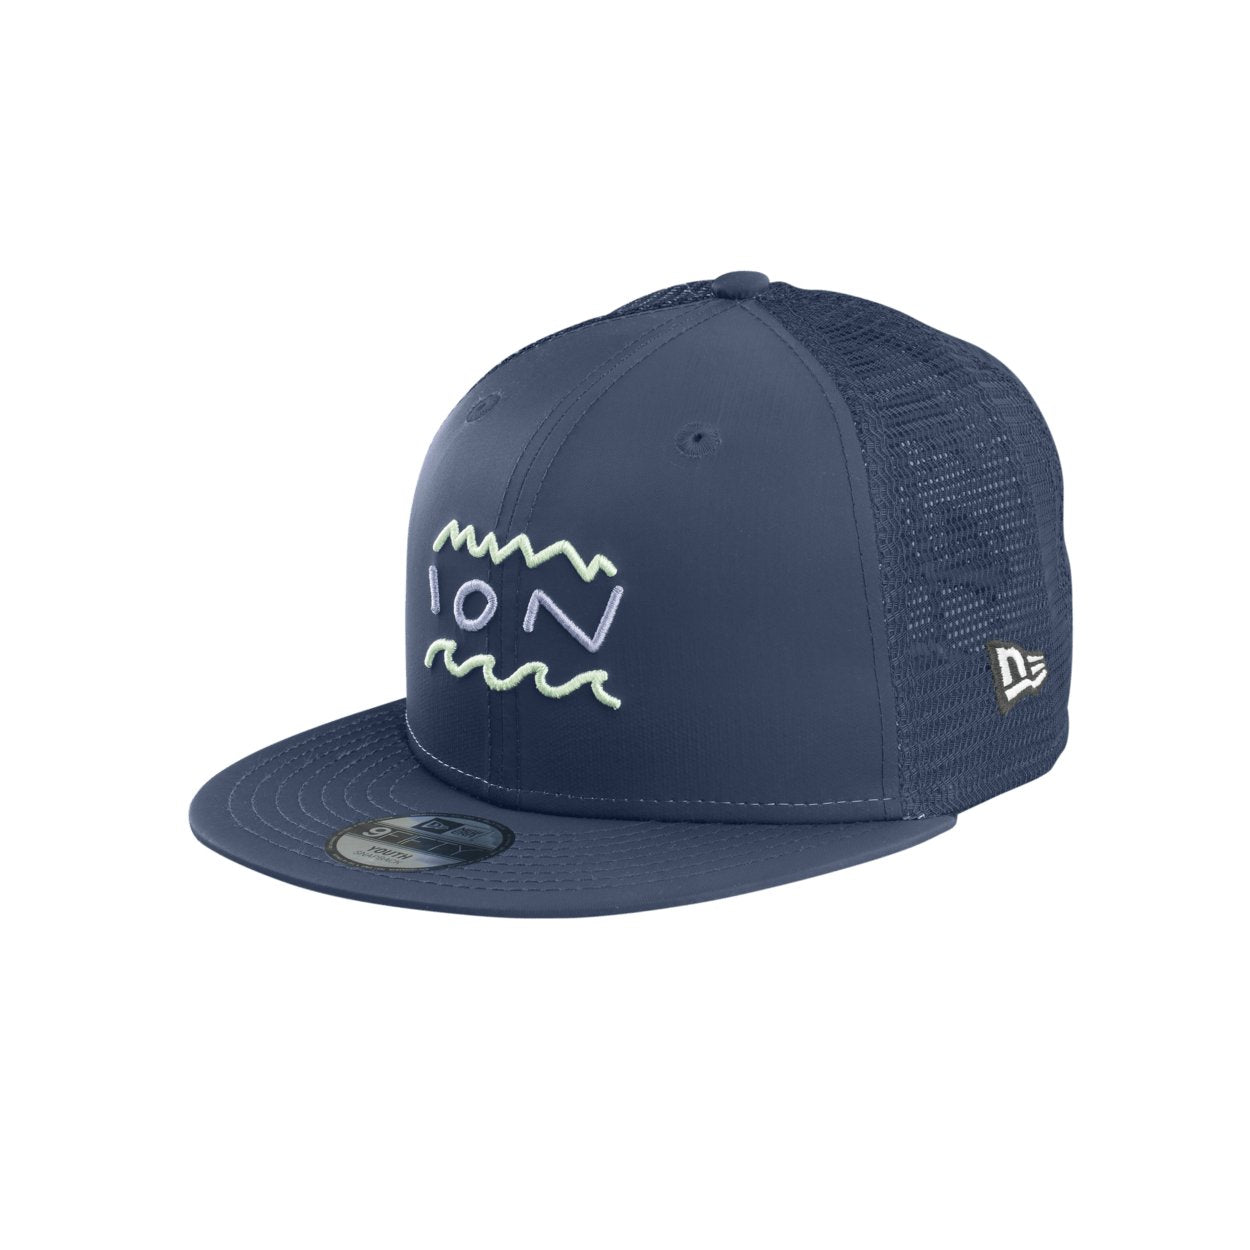 ION Cap Statement Youth 2023 - Worthing Watersports - 9010583119779 - Apparel - ION Bike